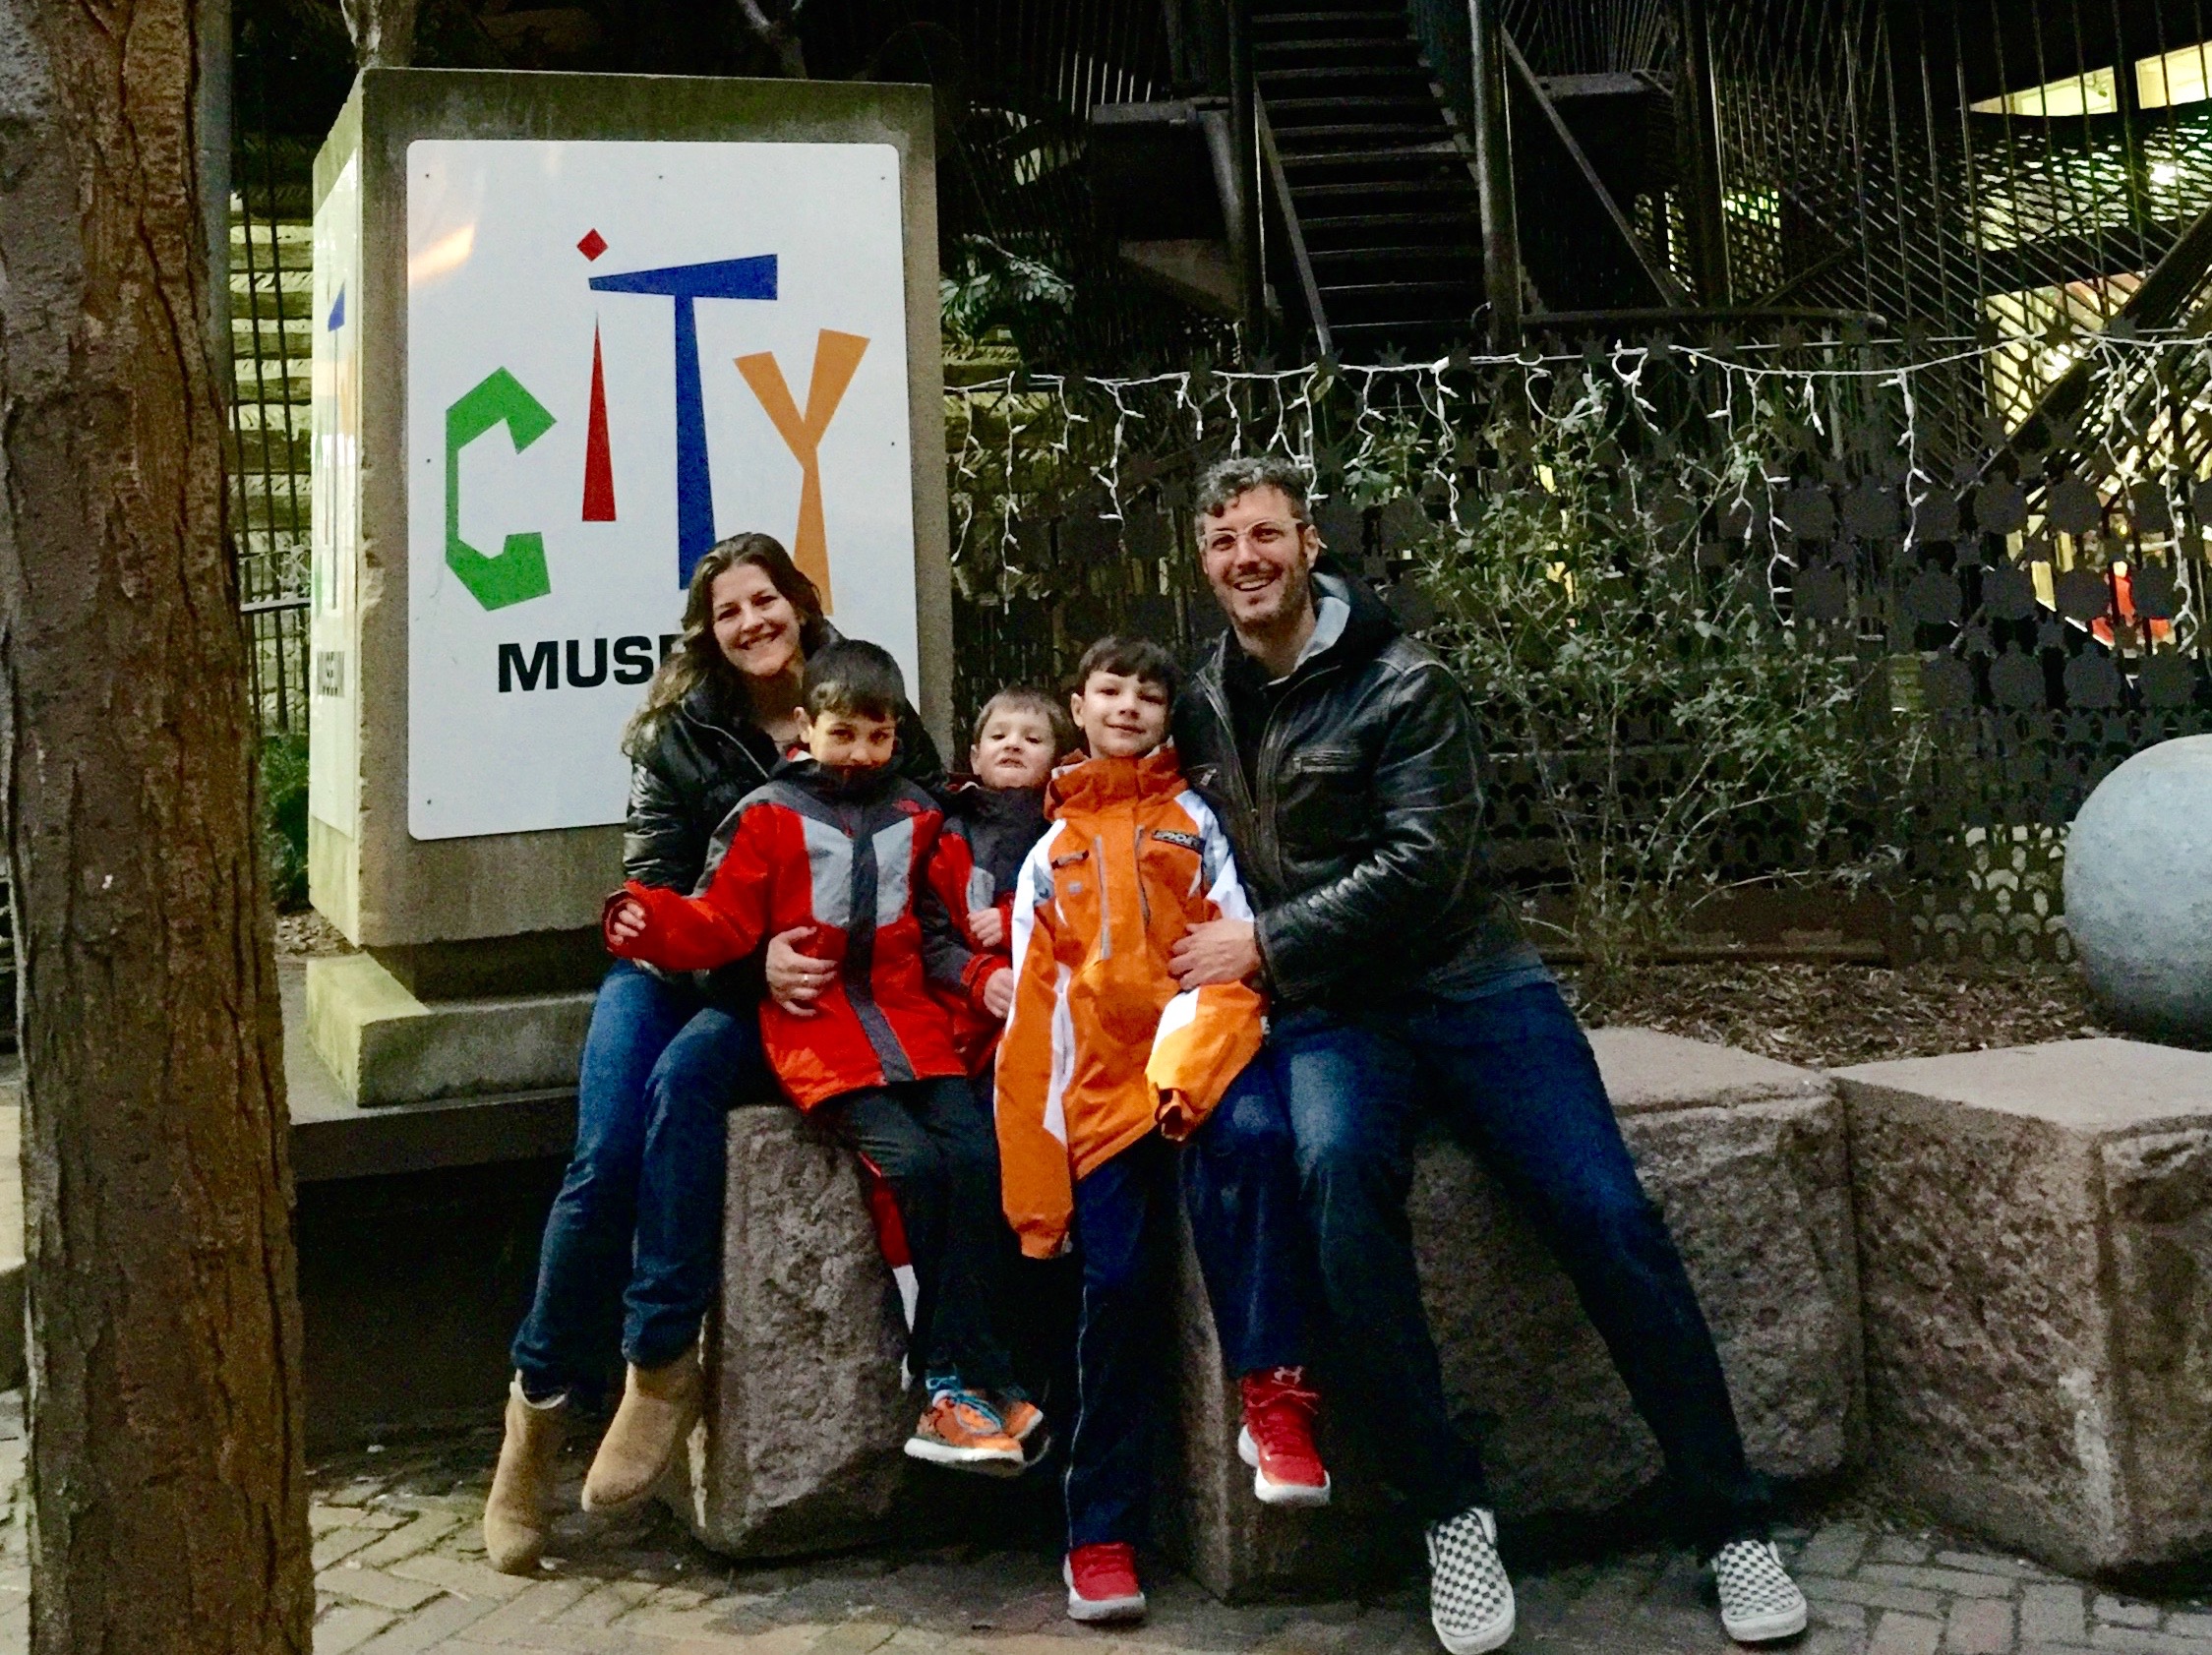 City Museum, Altschuler Family